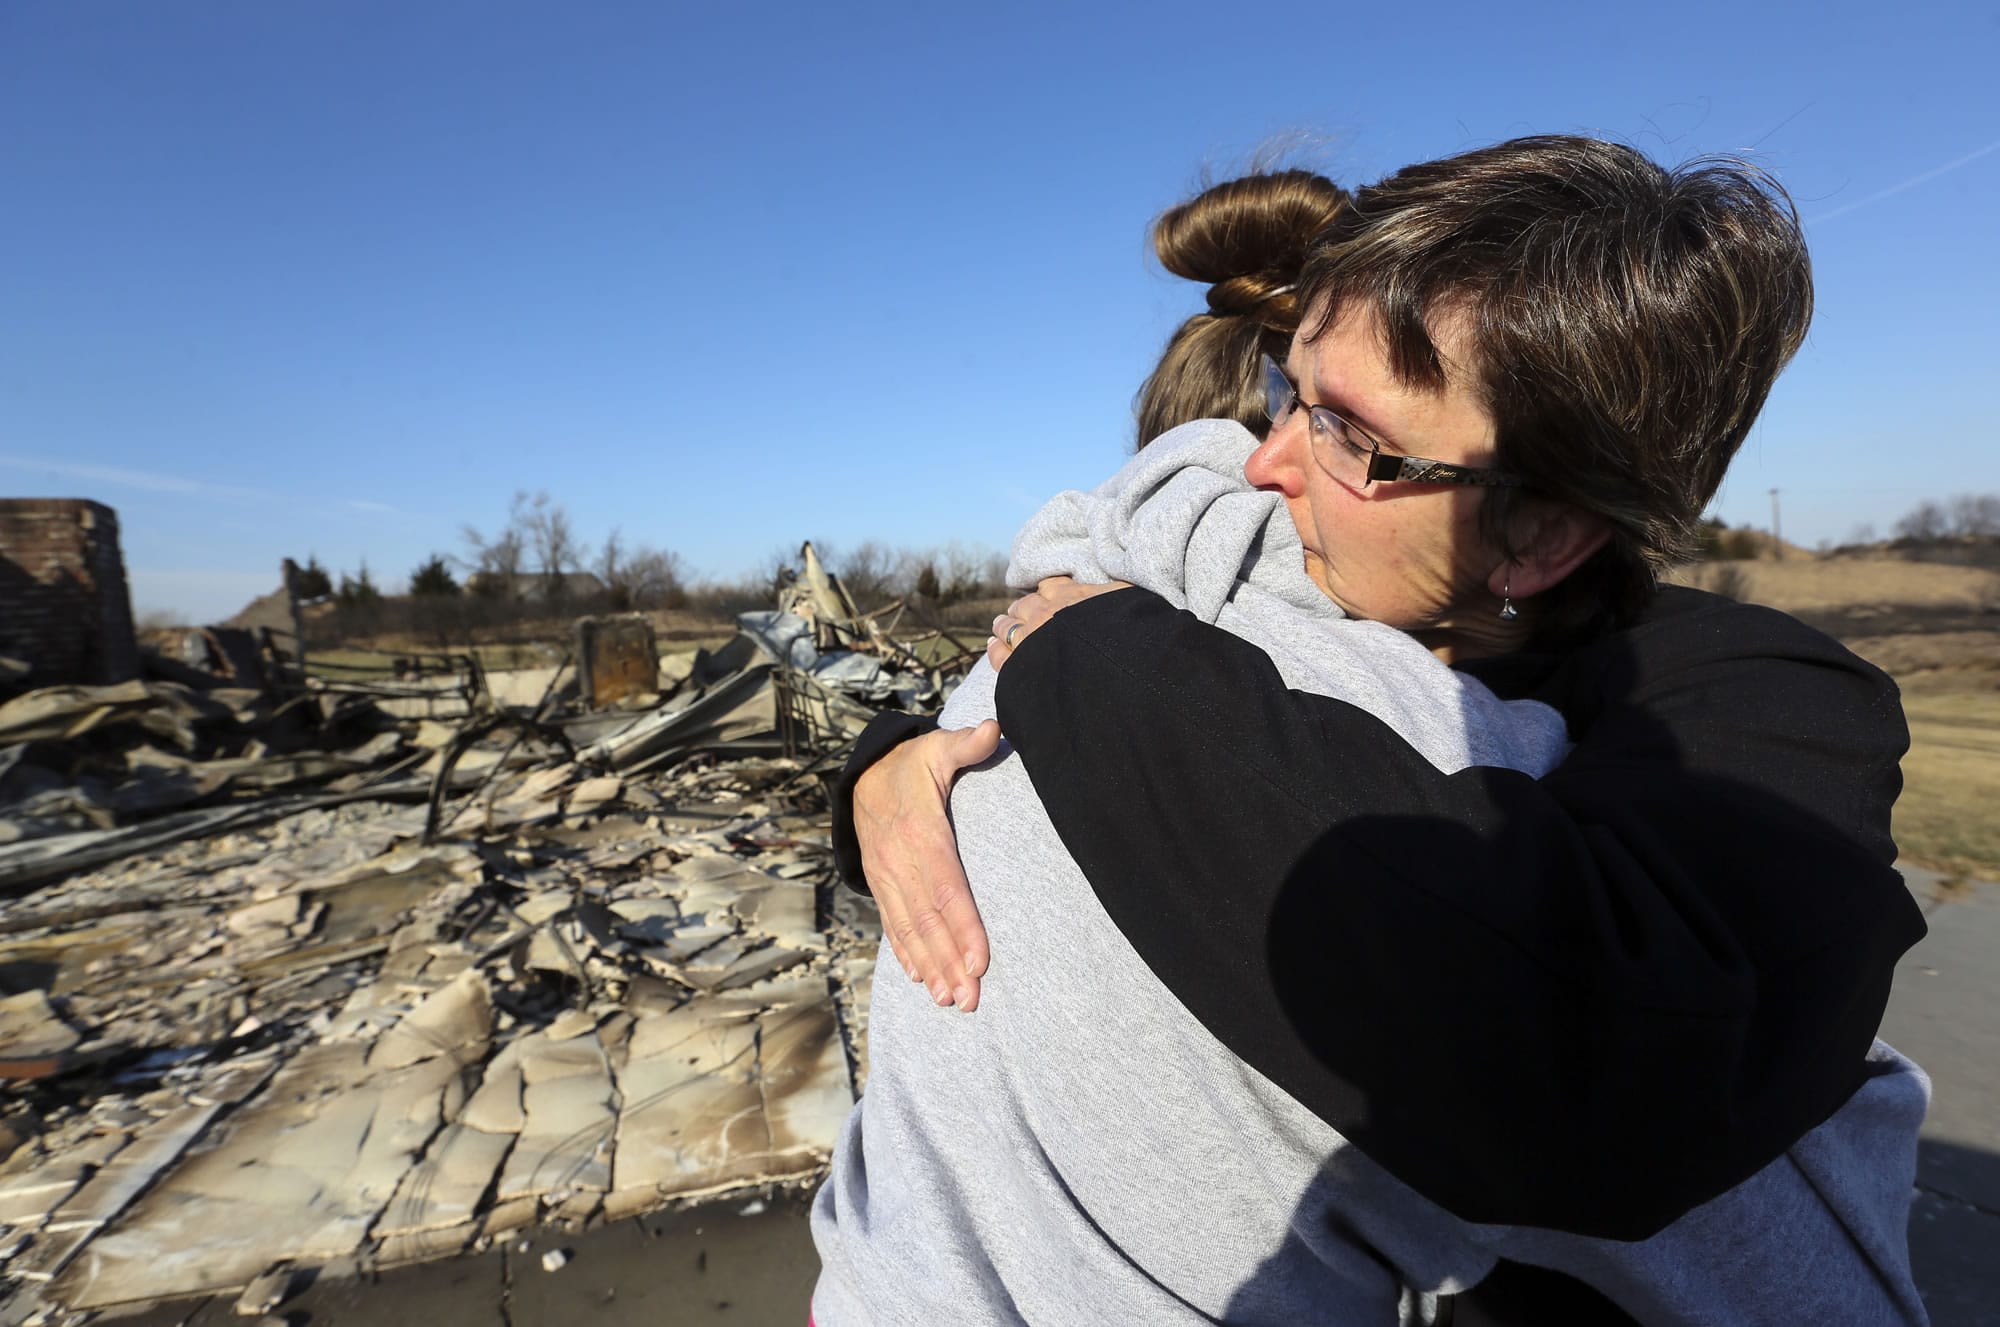 Zane Jackson embraces her daughter, Shelby Jackson, as they arrive to see their destroyed home for the first time in the Highlands subdivision on Wednesday, March 8, 2017, in Hutchinson, Kan. The home was destroyed in the wildfires Monday night.